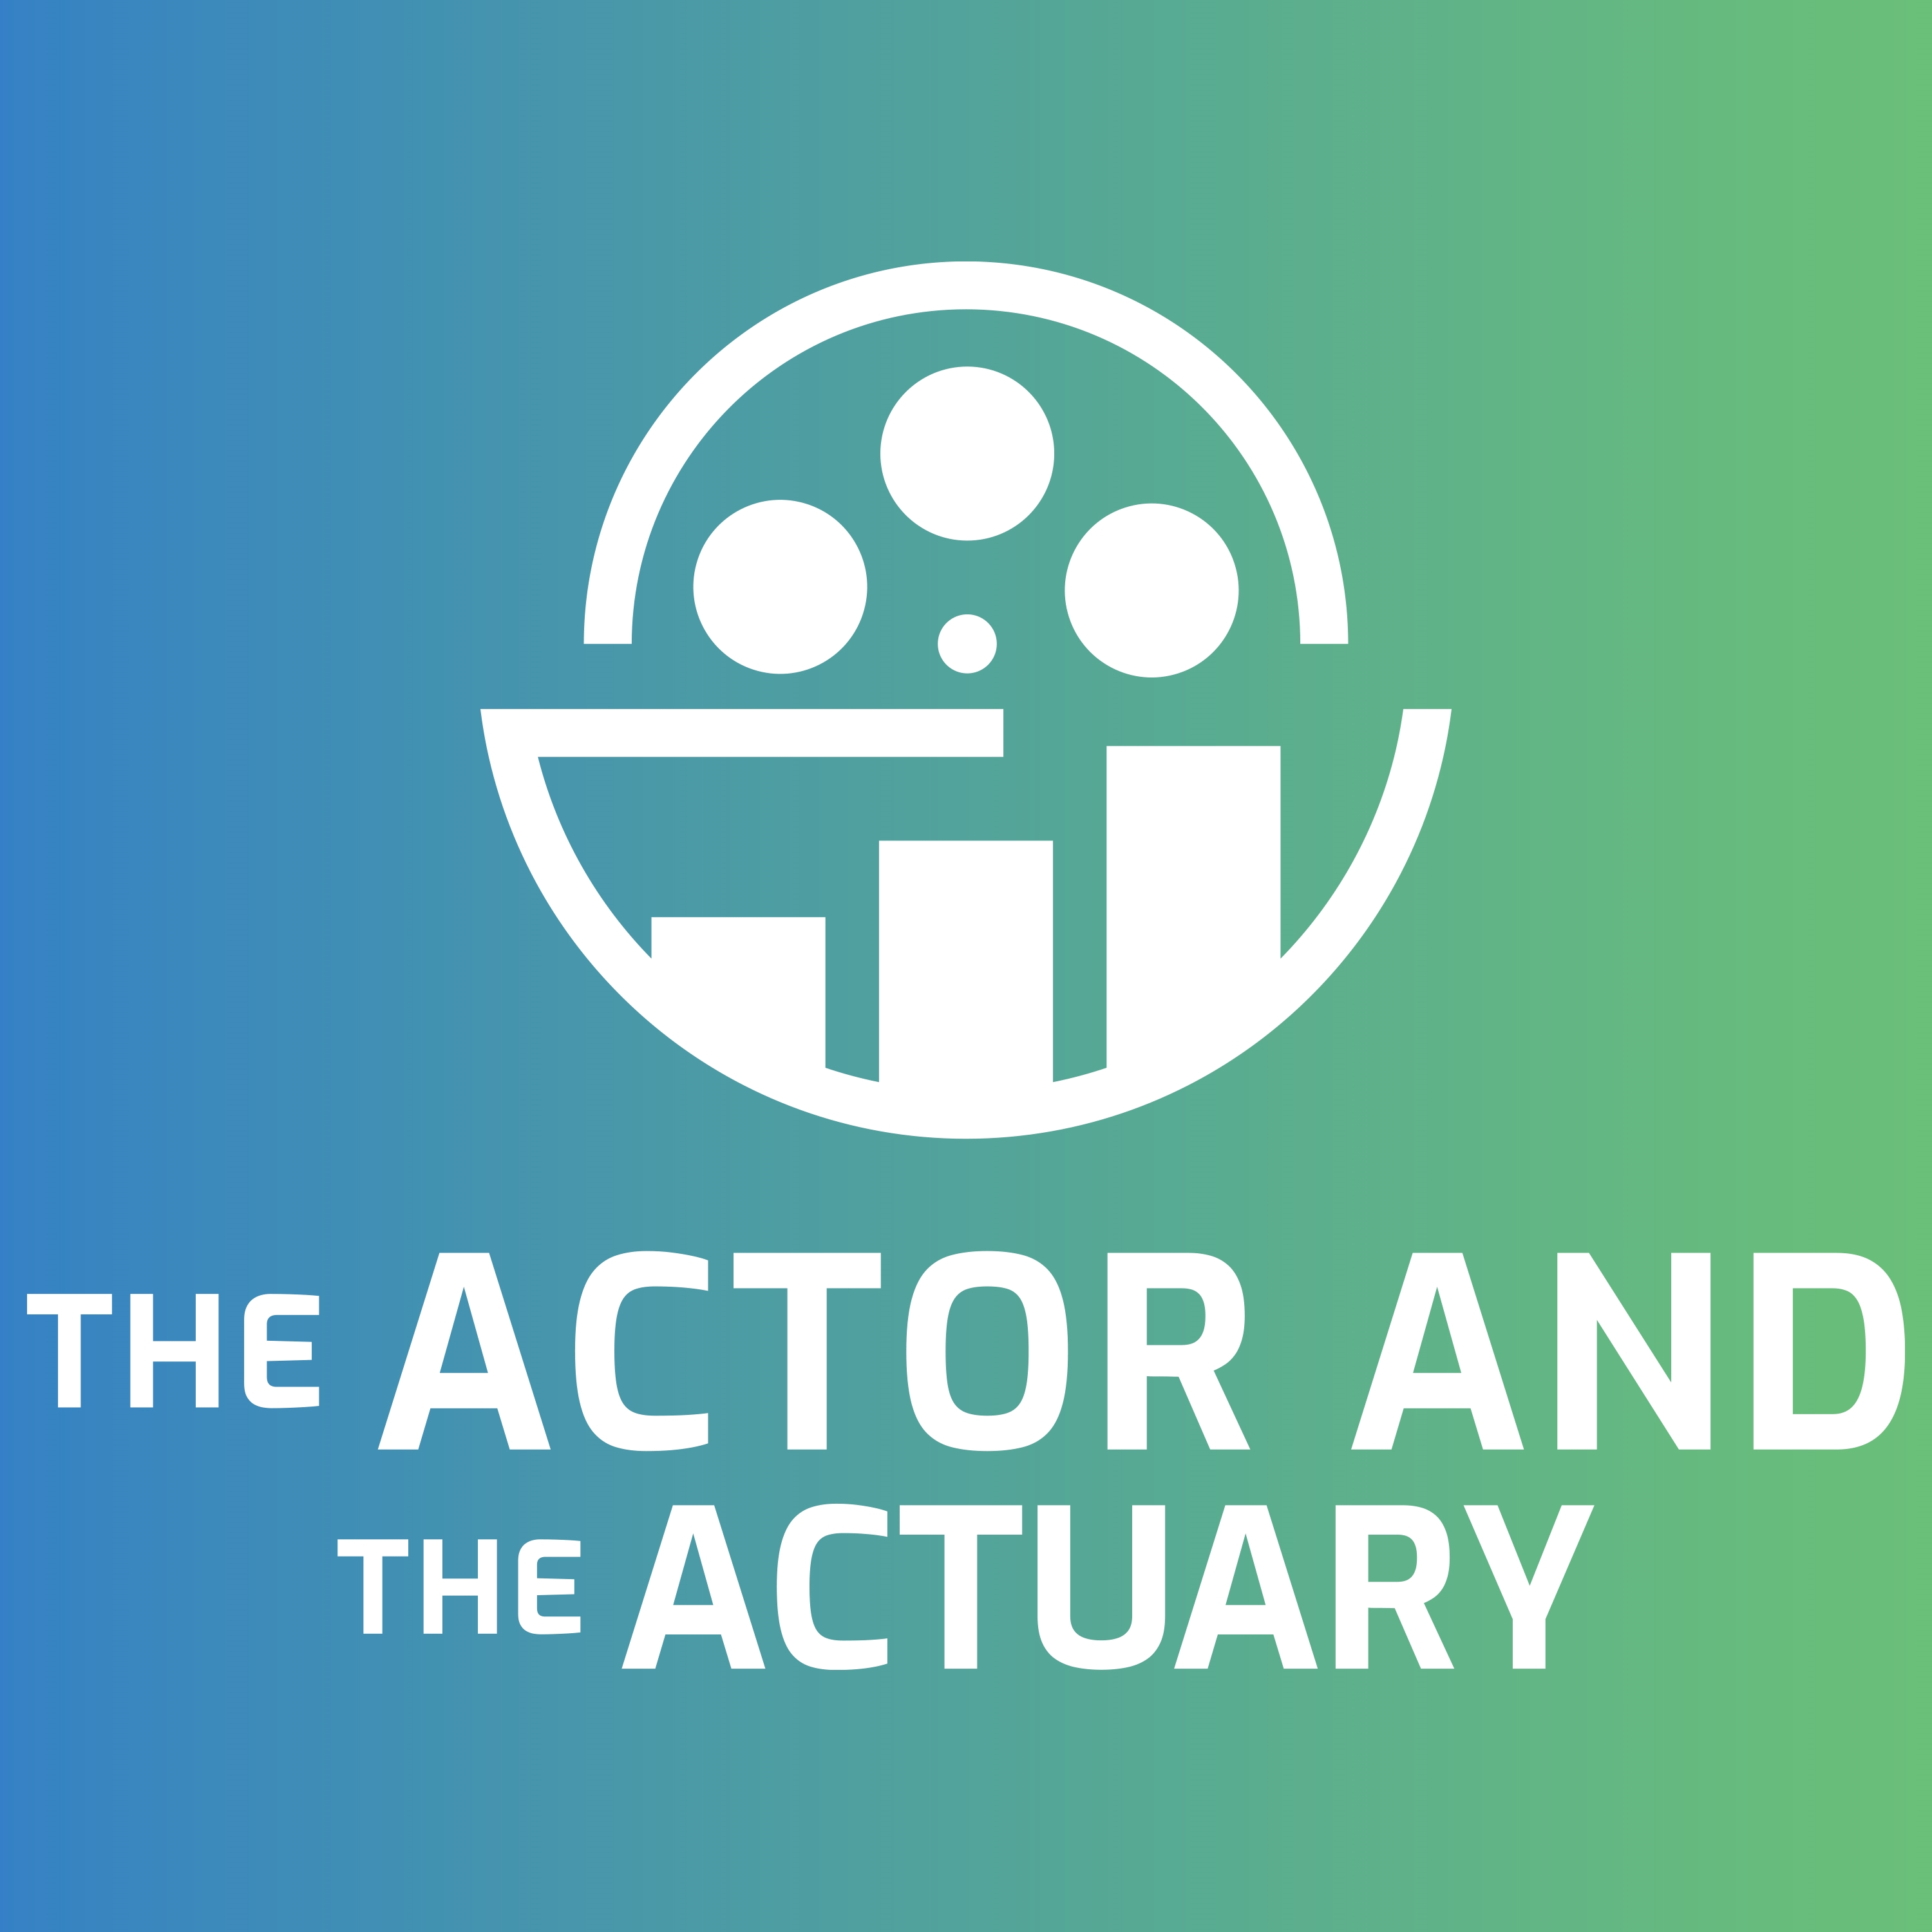 The Actor and the Actuary